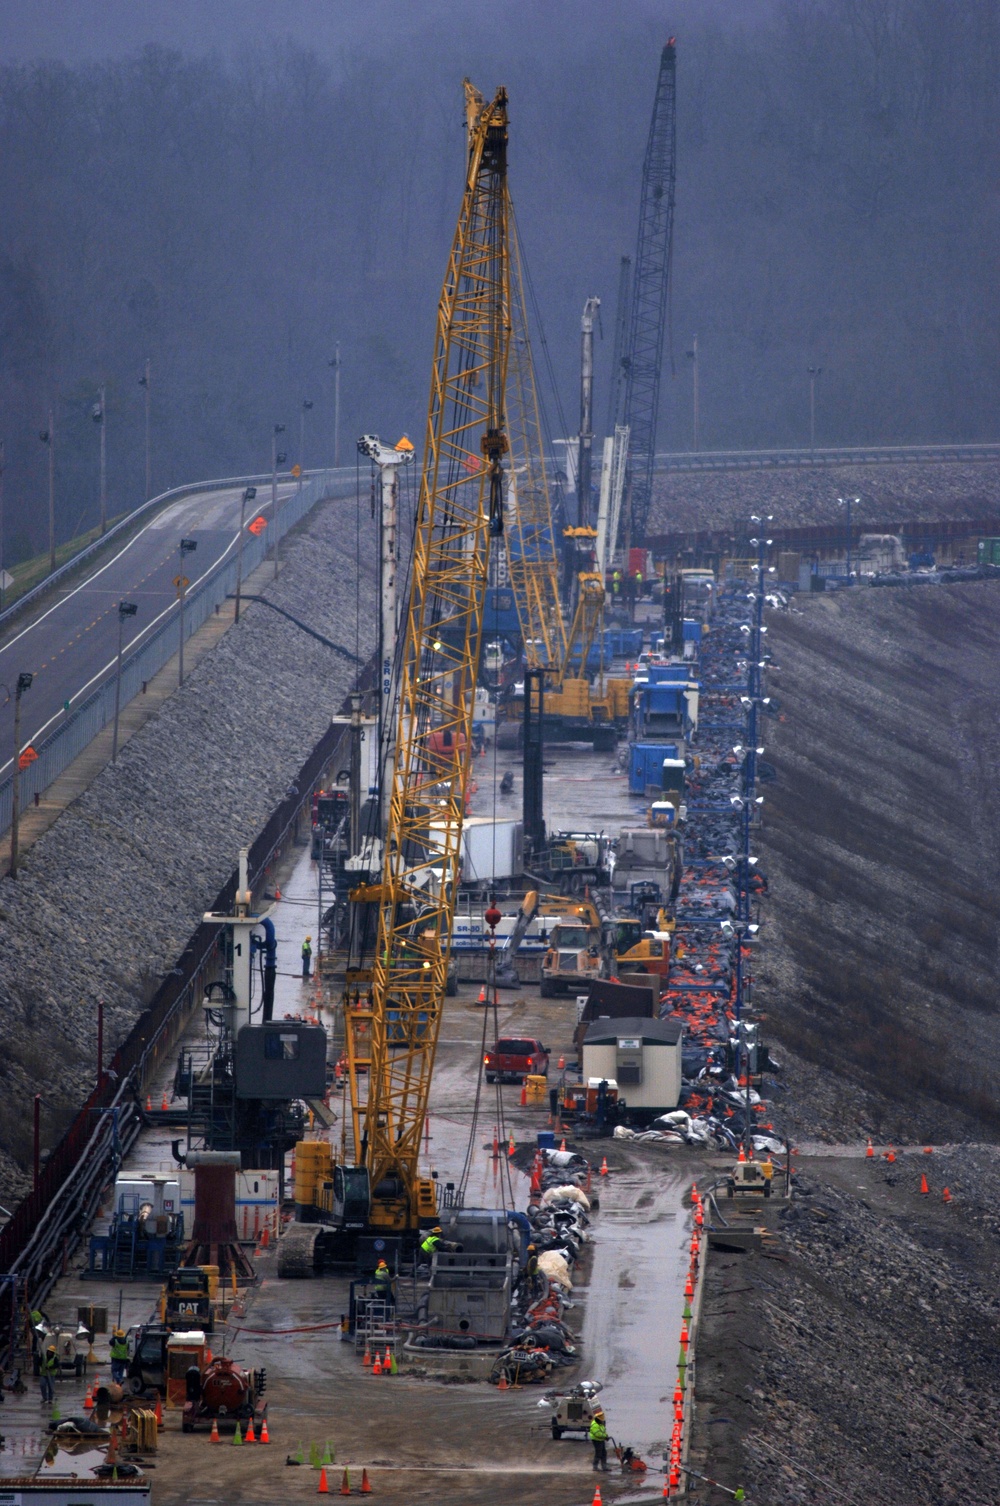 Construction commotion moves corps to Wolf Creek Dam safety milestone